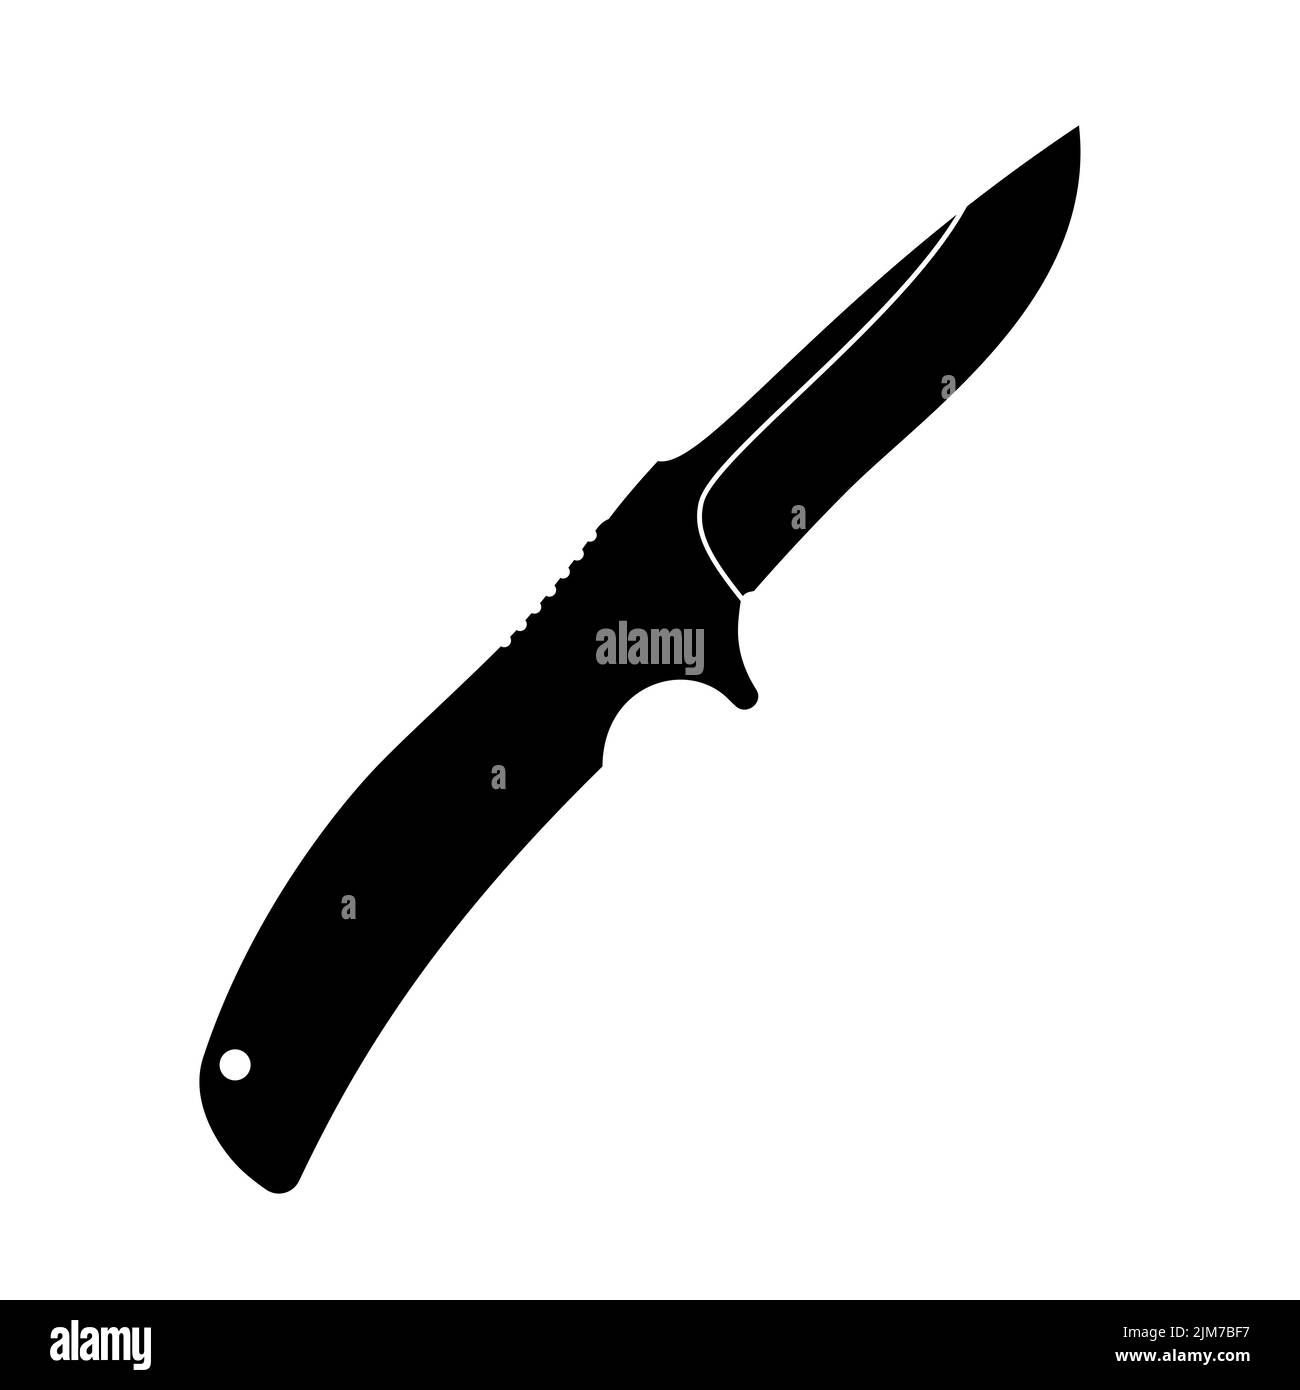 Knife icon. Black knife icon. Isolated knife symbol. Vector illustration. Stock Vector